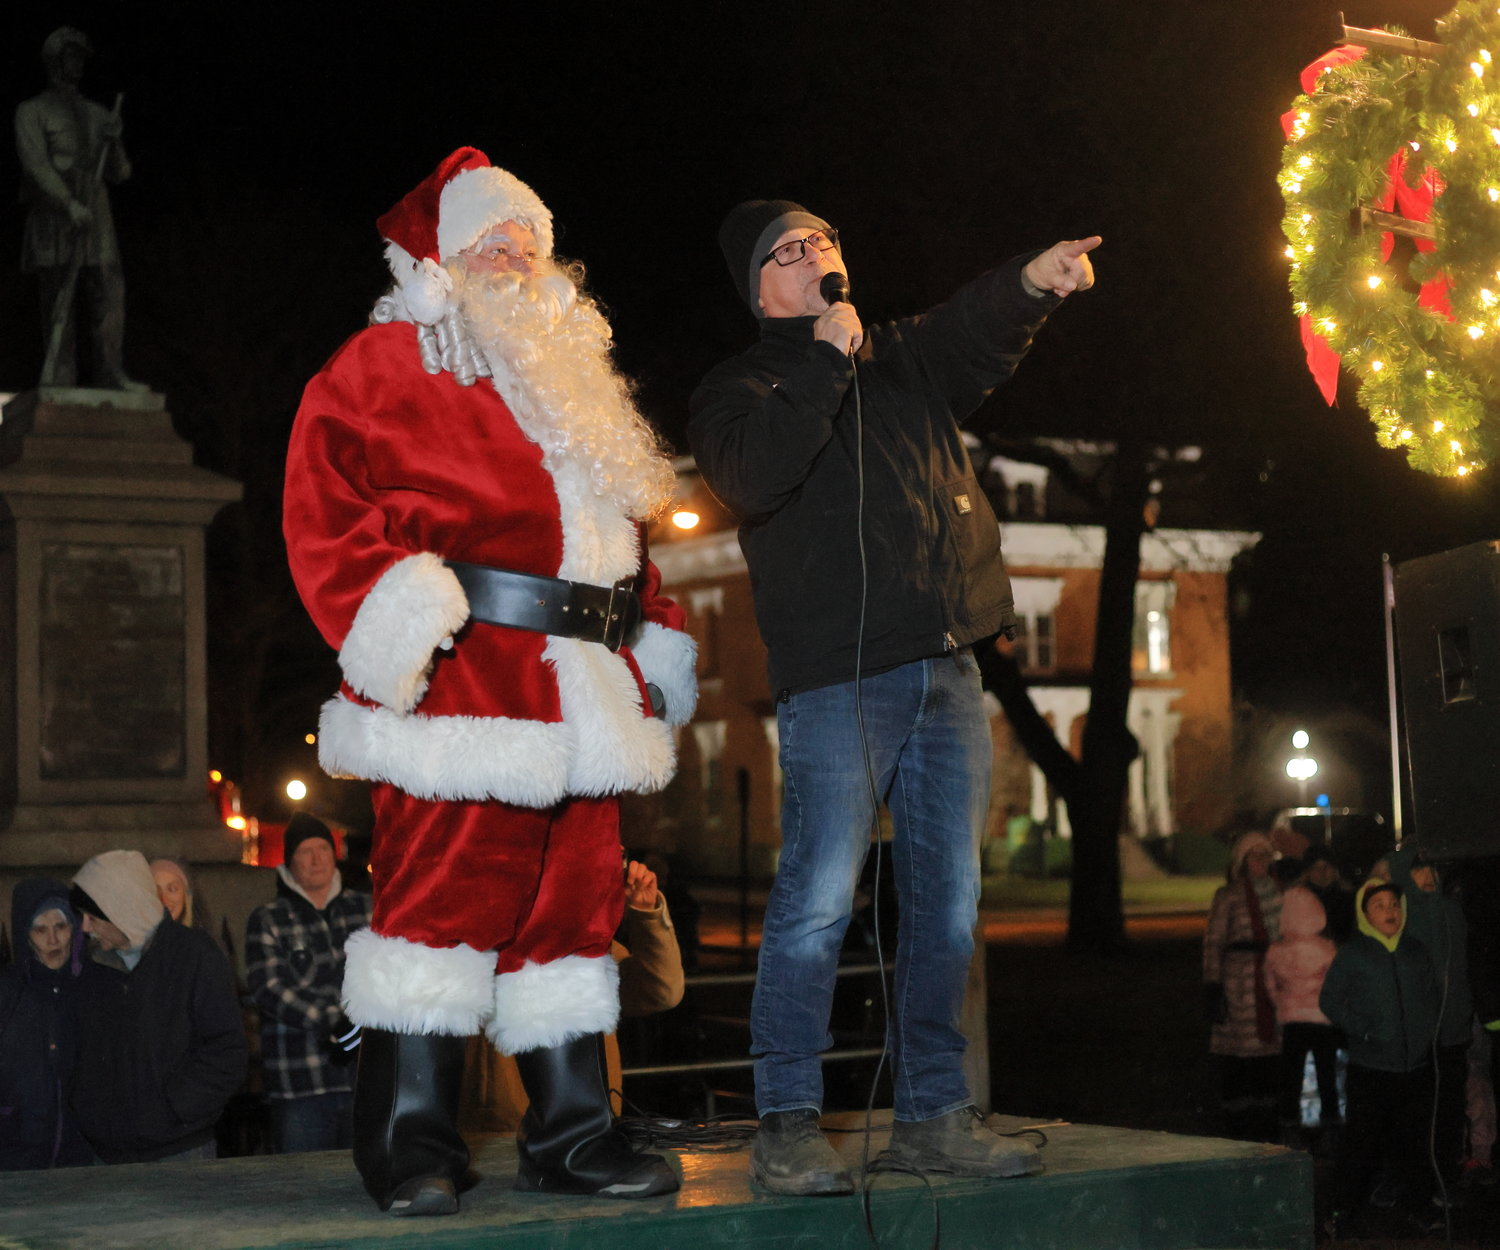 Santa and “Classic” George Schmitt of Bold Gold Radio are counting down with the crowd. Next they’ll hit the switch, turning the tree lights on in Honesdale’s Central Park, as well as on the large star on Irving Cliff that overlooking the borough.  ..